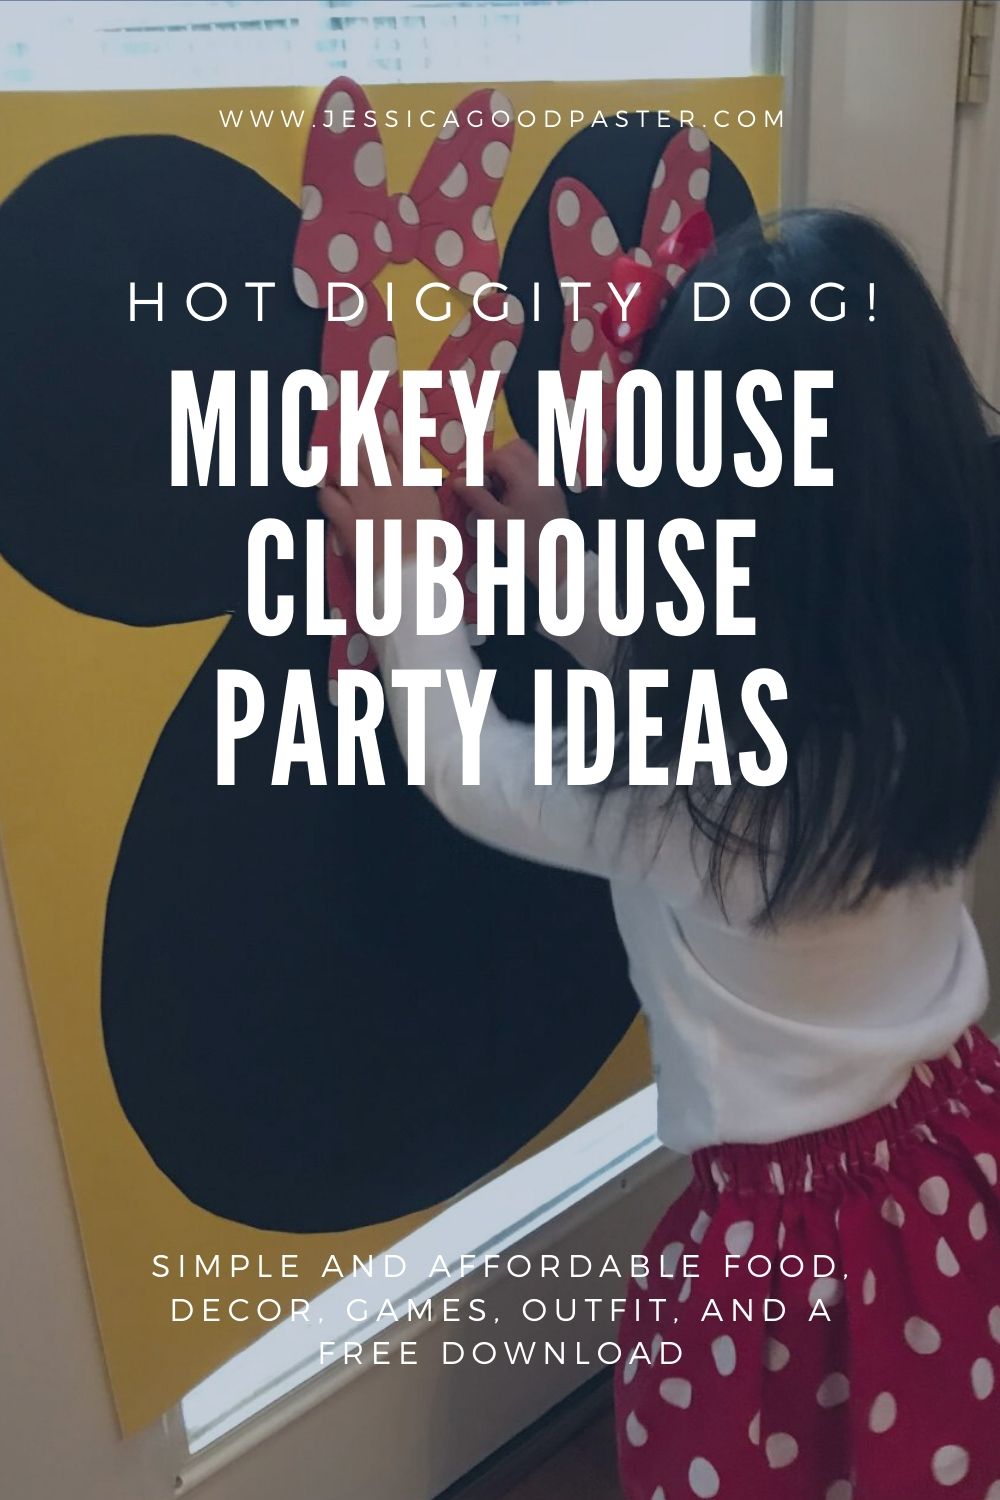 How to Host an Amazing Mickey Mouse Clubhouse Party on a Budget | Tons of affordable options for Mickey or Minnie parties including food ideas, decorations, outfits, games, party supplies, and free printables! Your Mickey Mouse Clubhouse fan will have a great birthday ! #mickeyparty #mickeymouse #mickeymouseparty #minnieparty #birthday #mickeymouseclubhouse #mickeyprintables